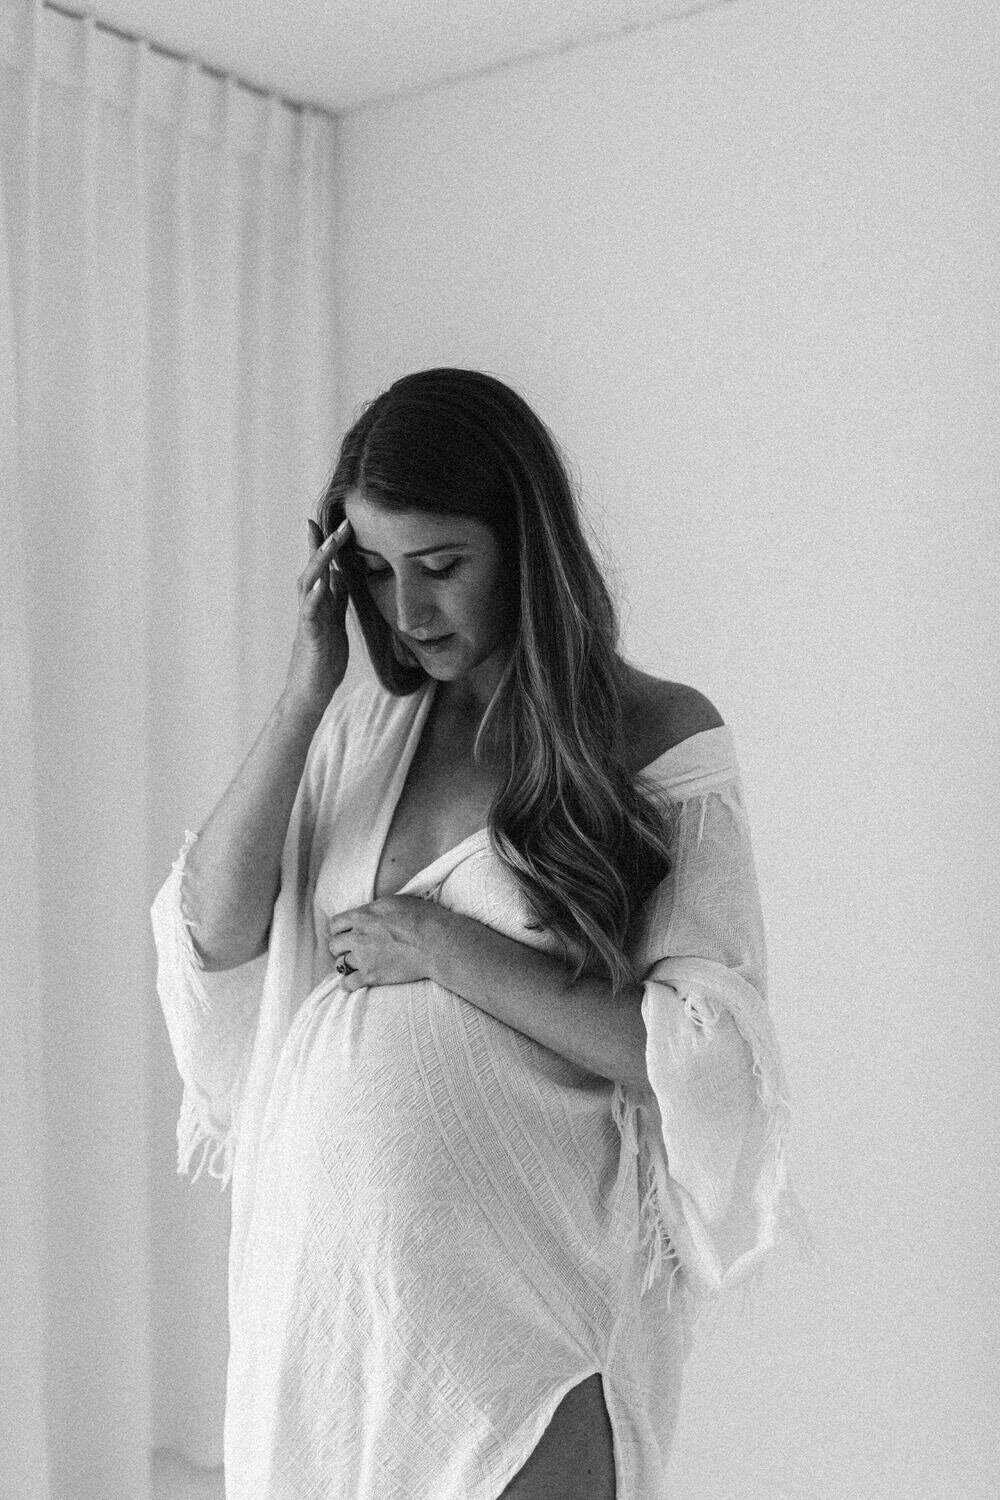 Black and white photograph of woman wearing a bedsheet who is pregnant, she is holding her belly and tucking her hair behind her ear